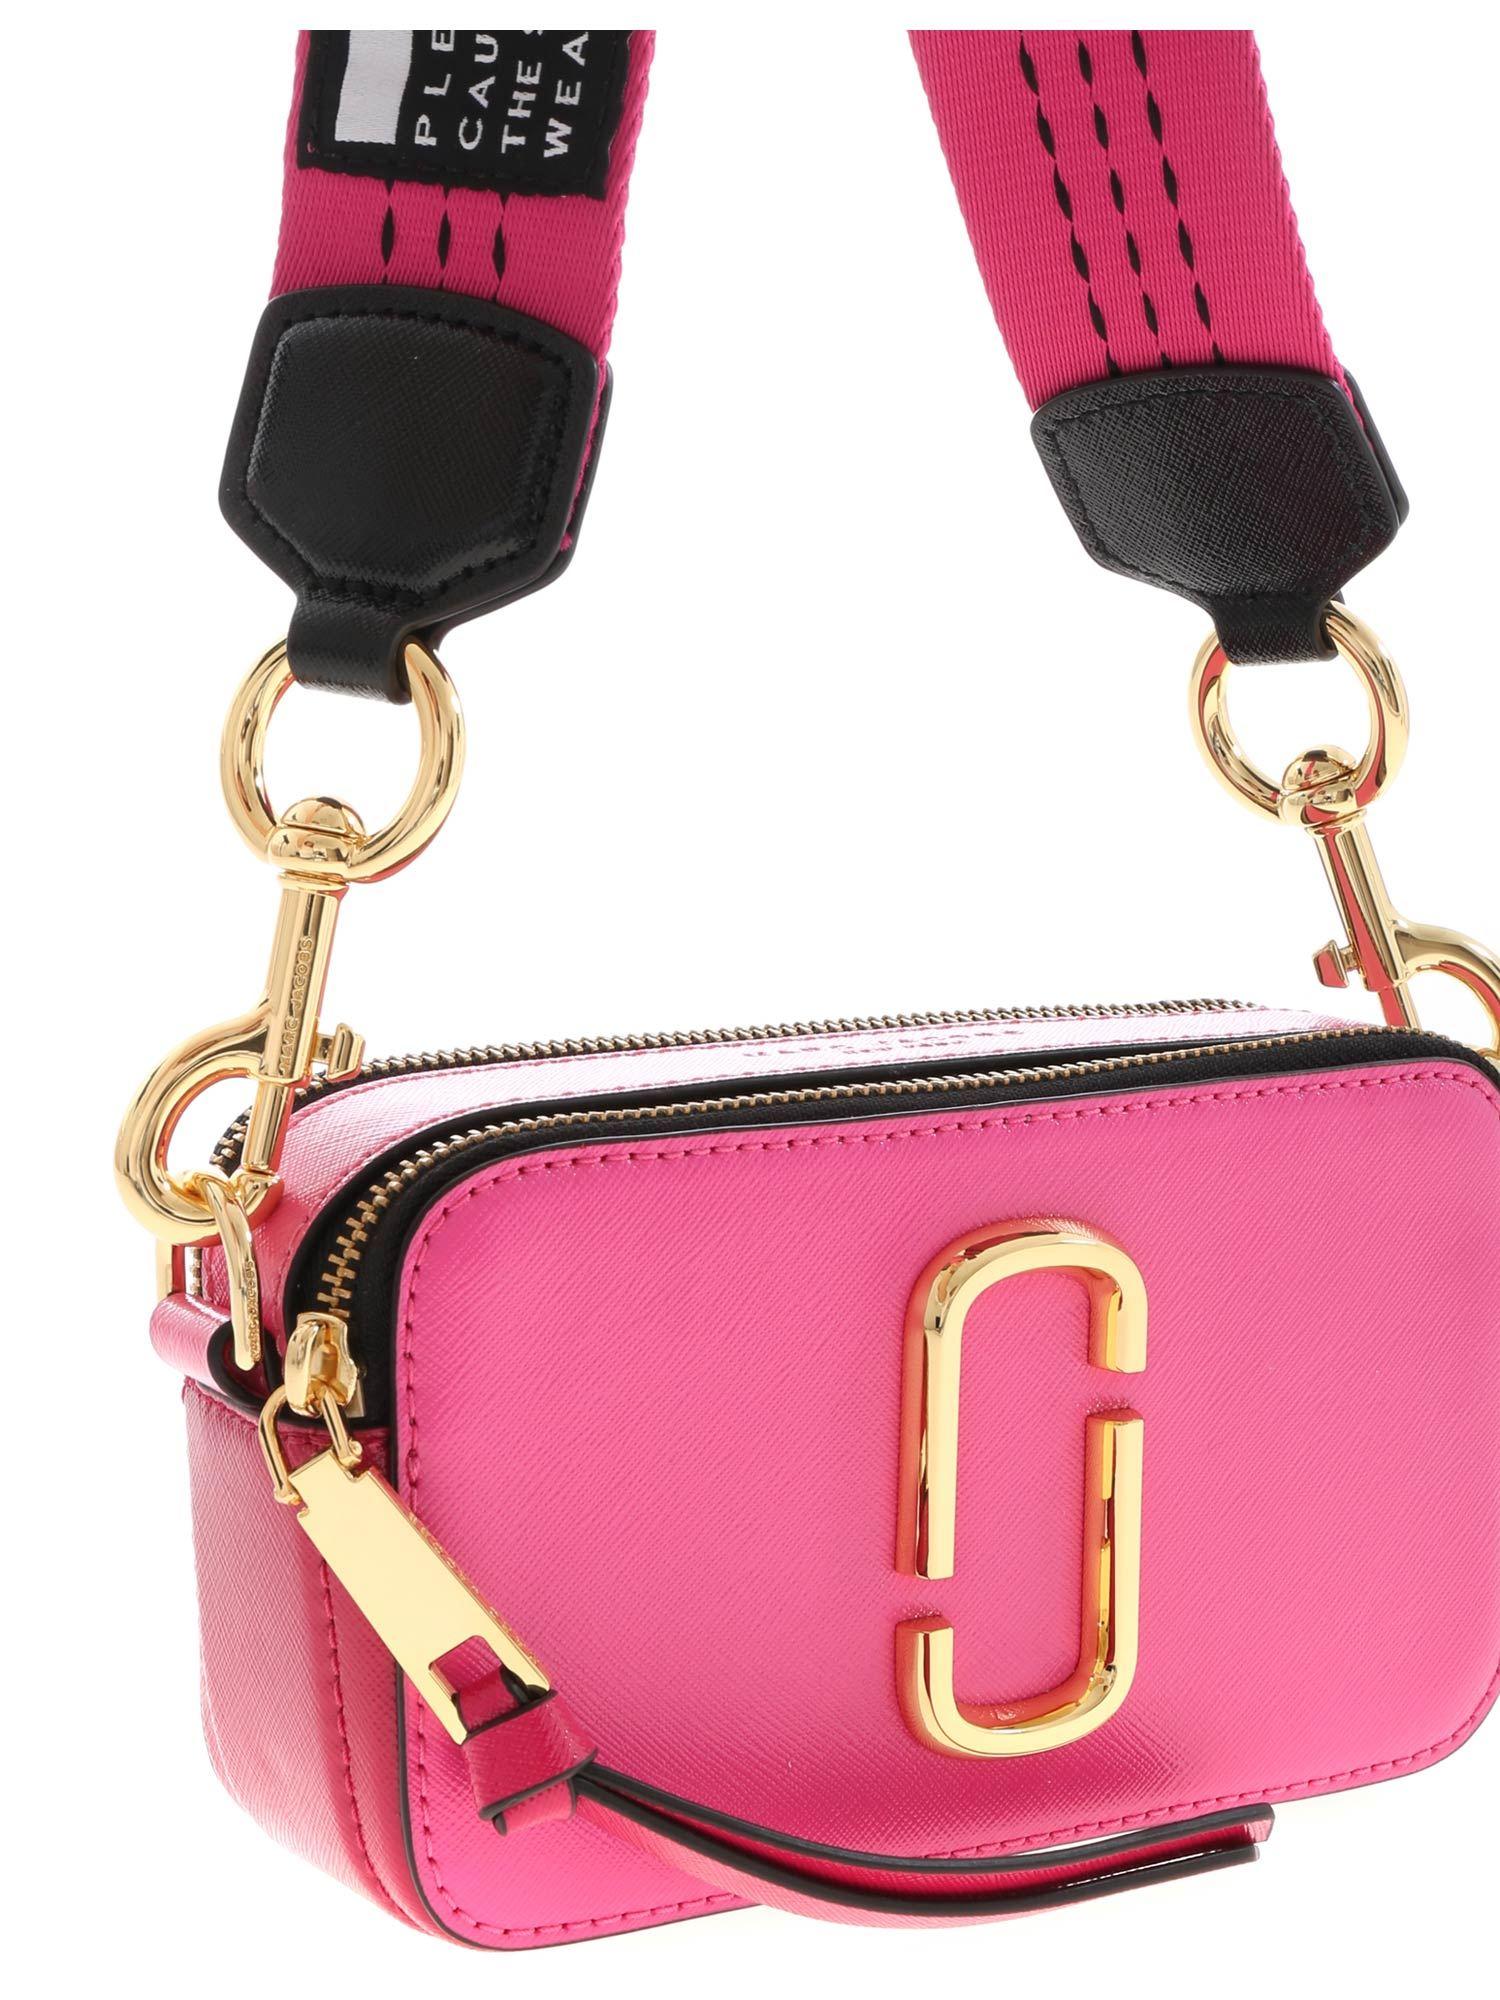 Marc Jacobs Trixie Shoulder Bag In Shades Of Pink - Lyst